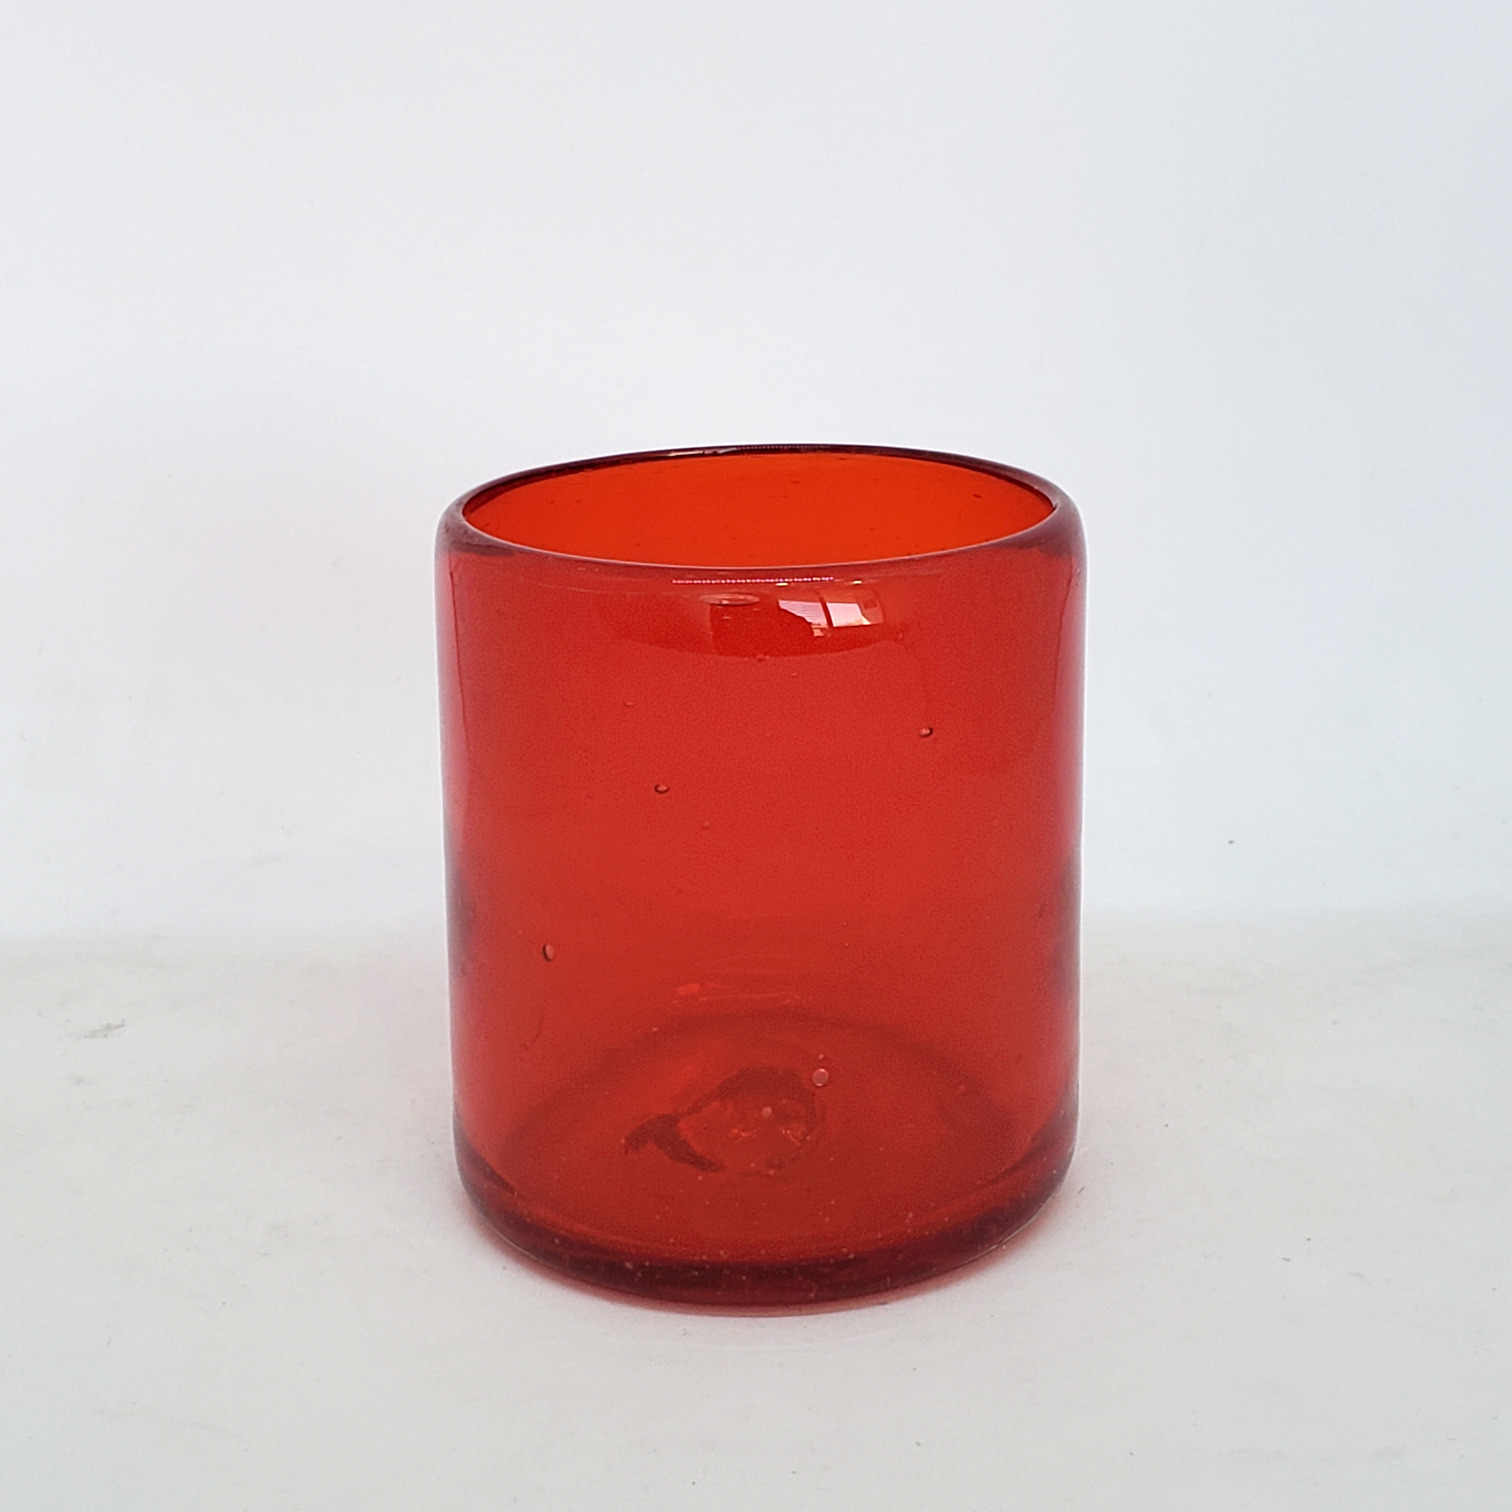 Wholesale MEXICAN GLASSWARE / Solid Ruby Red 9 oz Short Tumblers  / Enhance your favorite drink with these colorful handcrafted glasses.